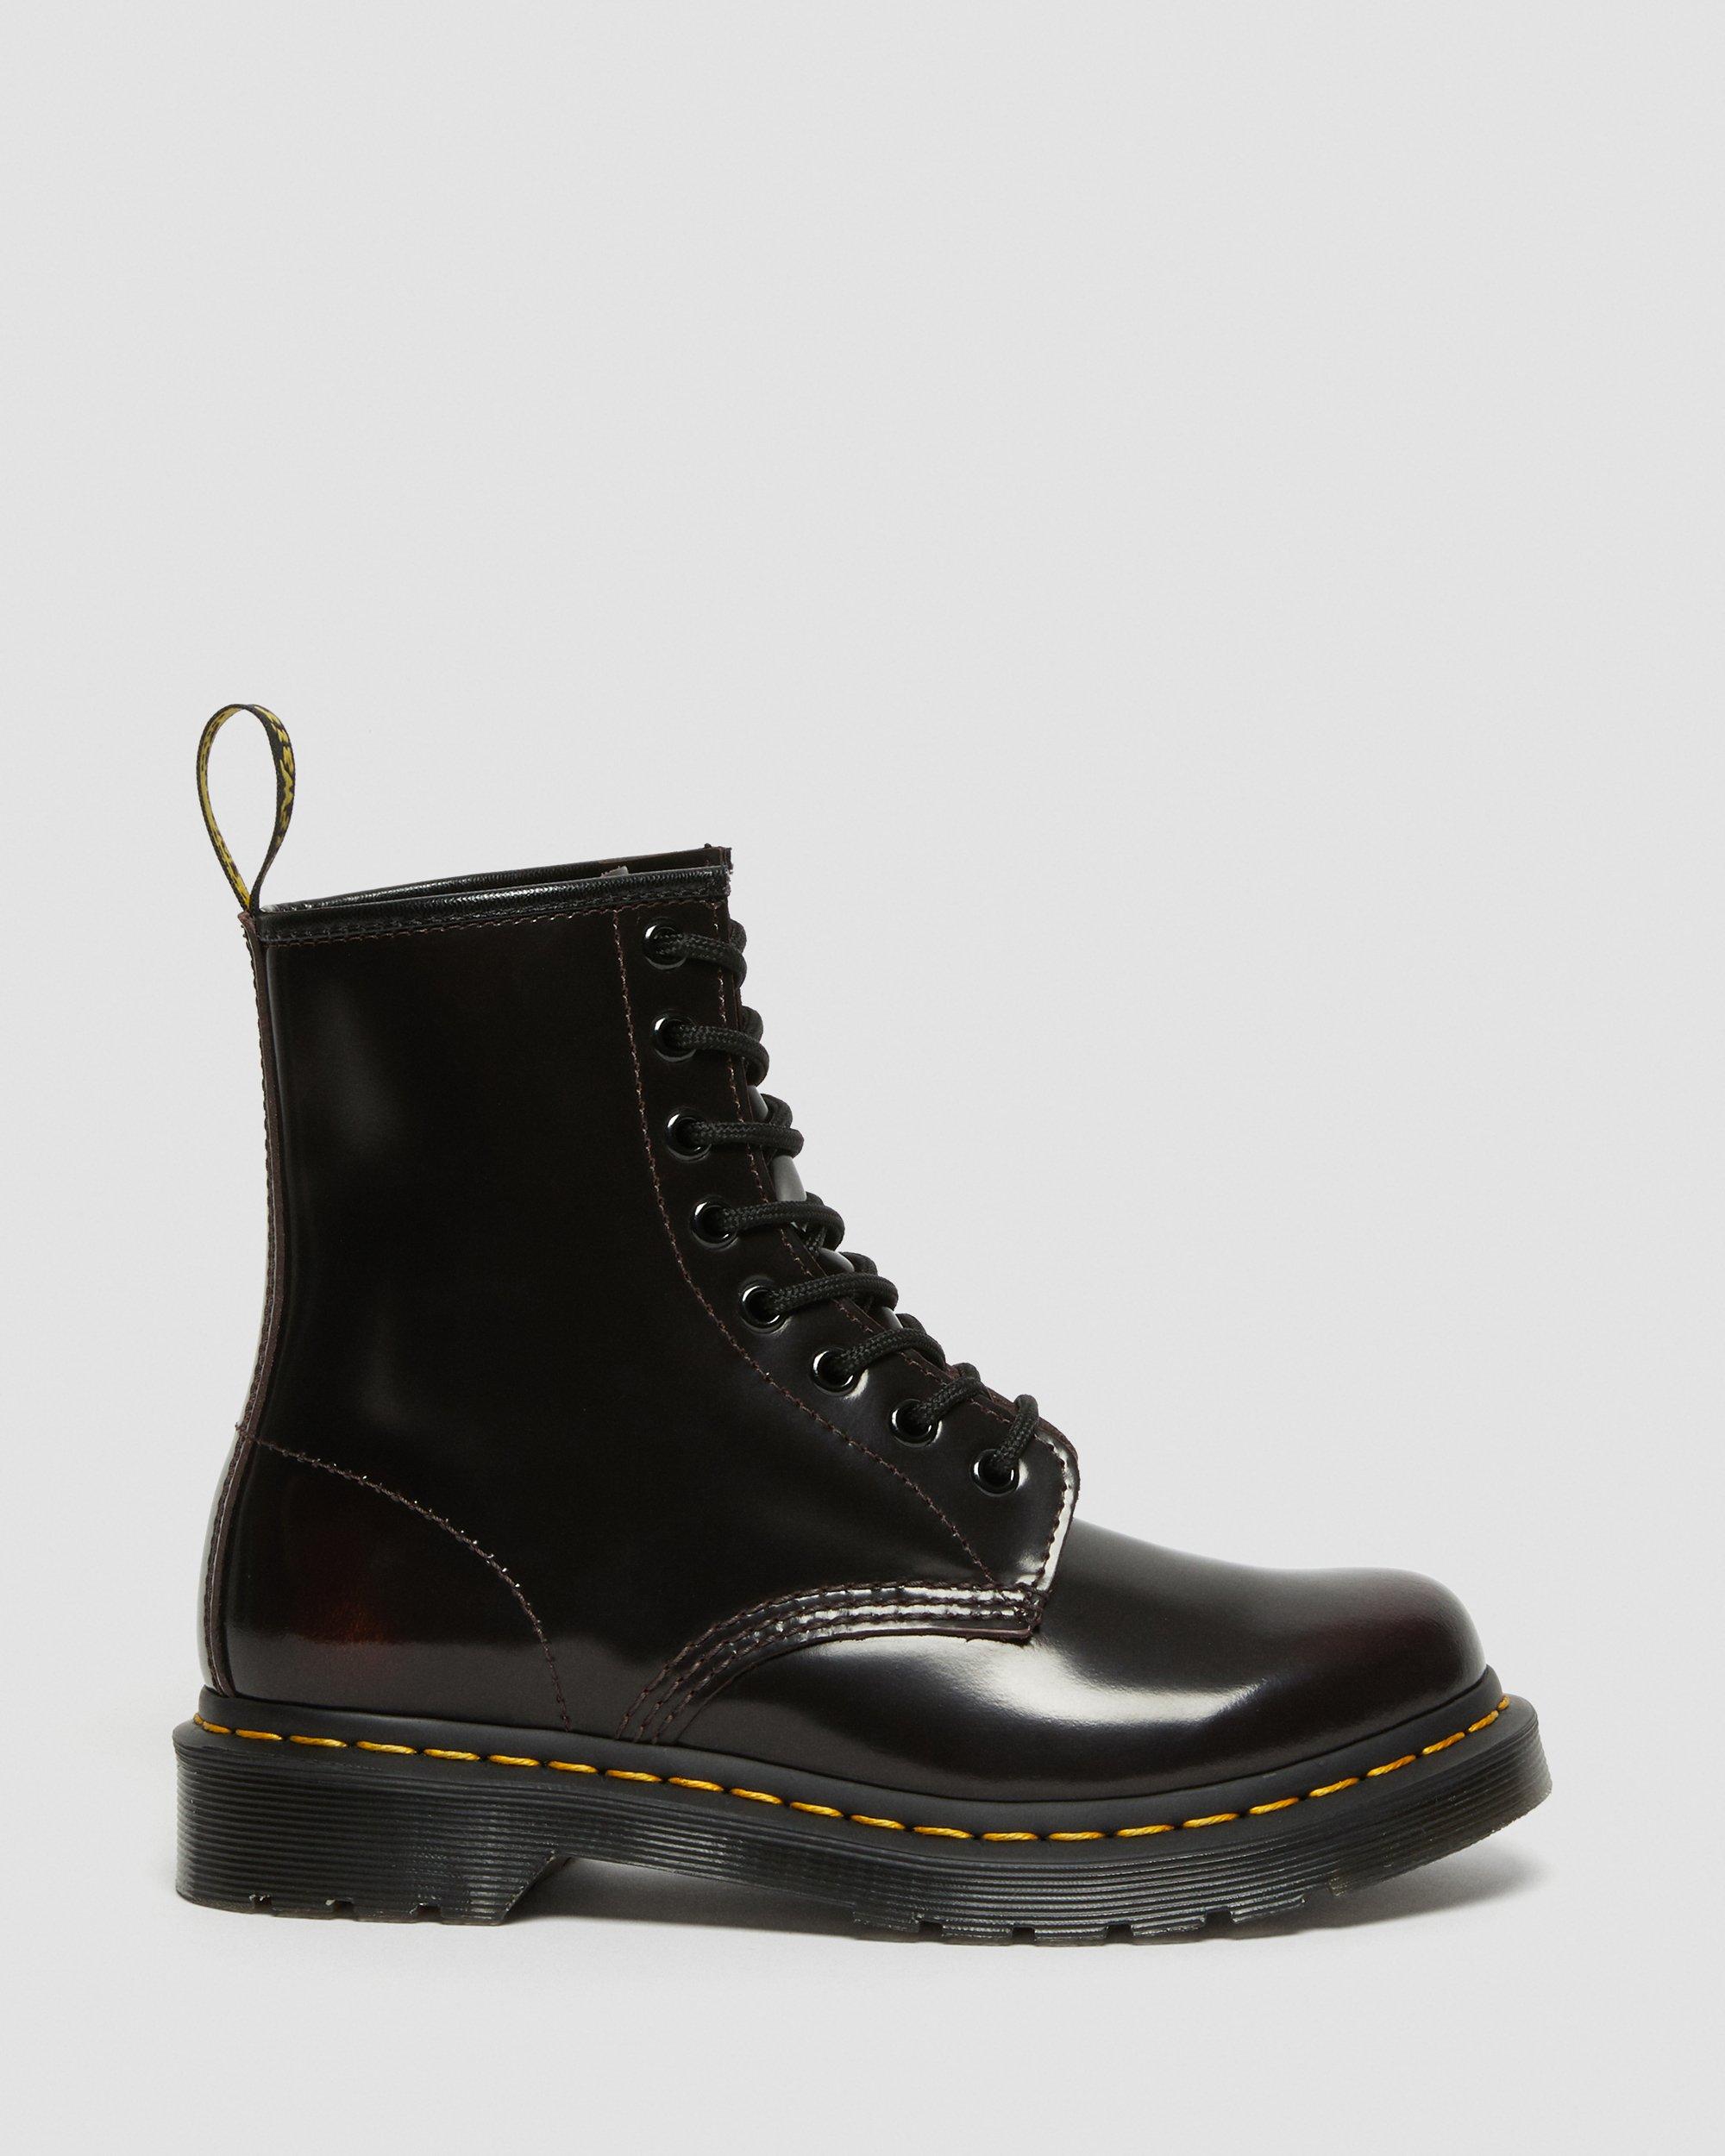 1460 WOMEN'S ARCADIA LEATHER LACE UP BOOTS | Dr. Martens